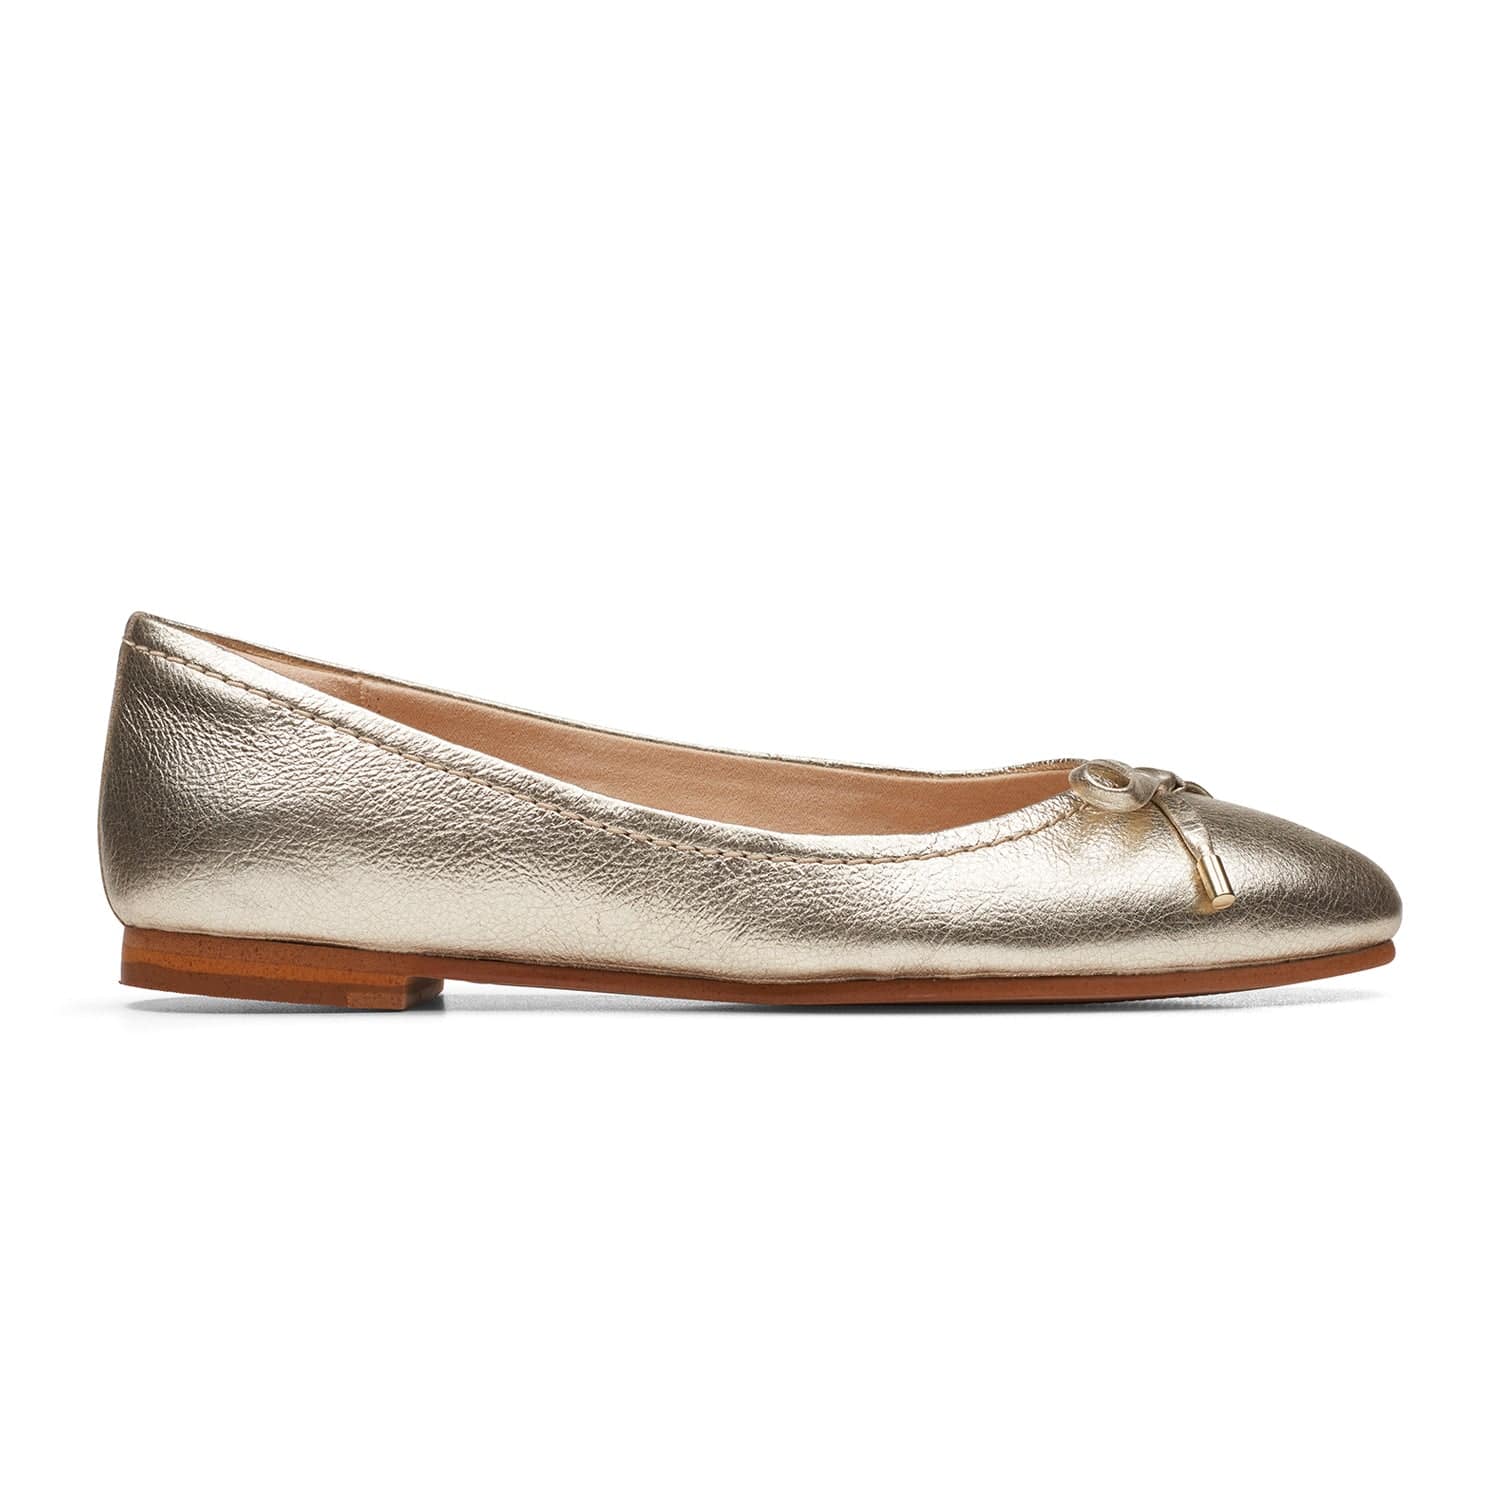 Clarks Grace Lily Shoes - Champagne Leather - 261668134 - D Width (Standard Fit)